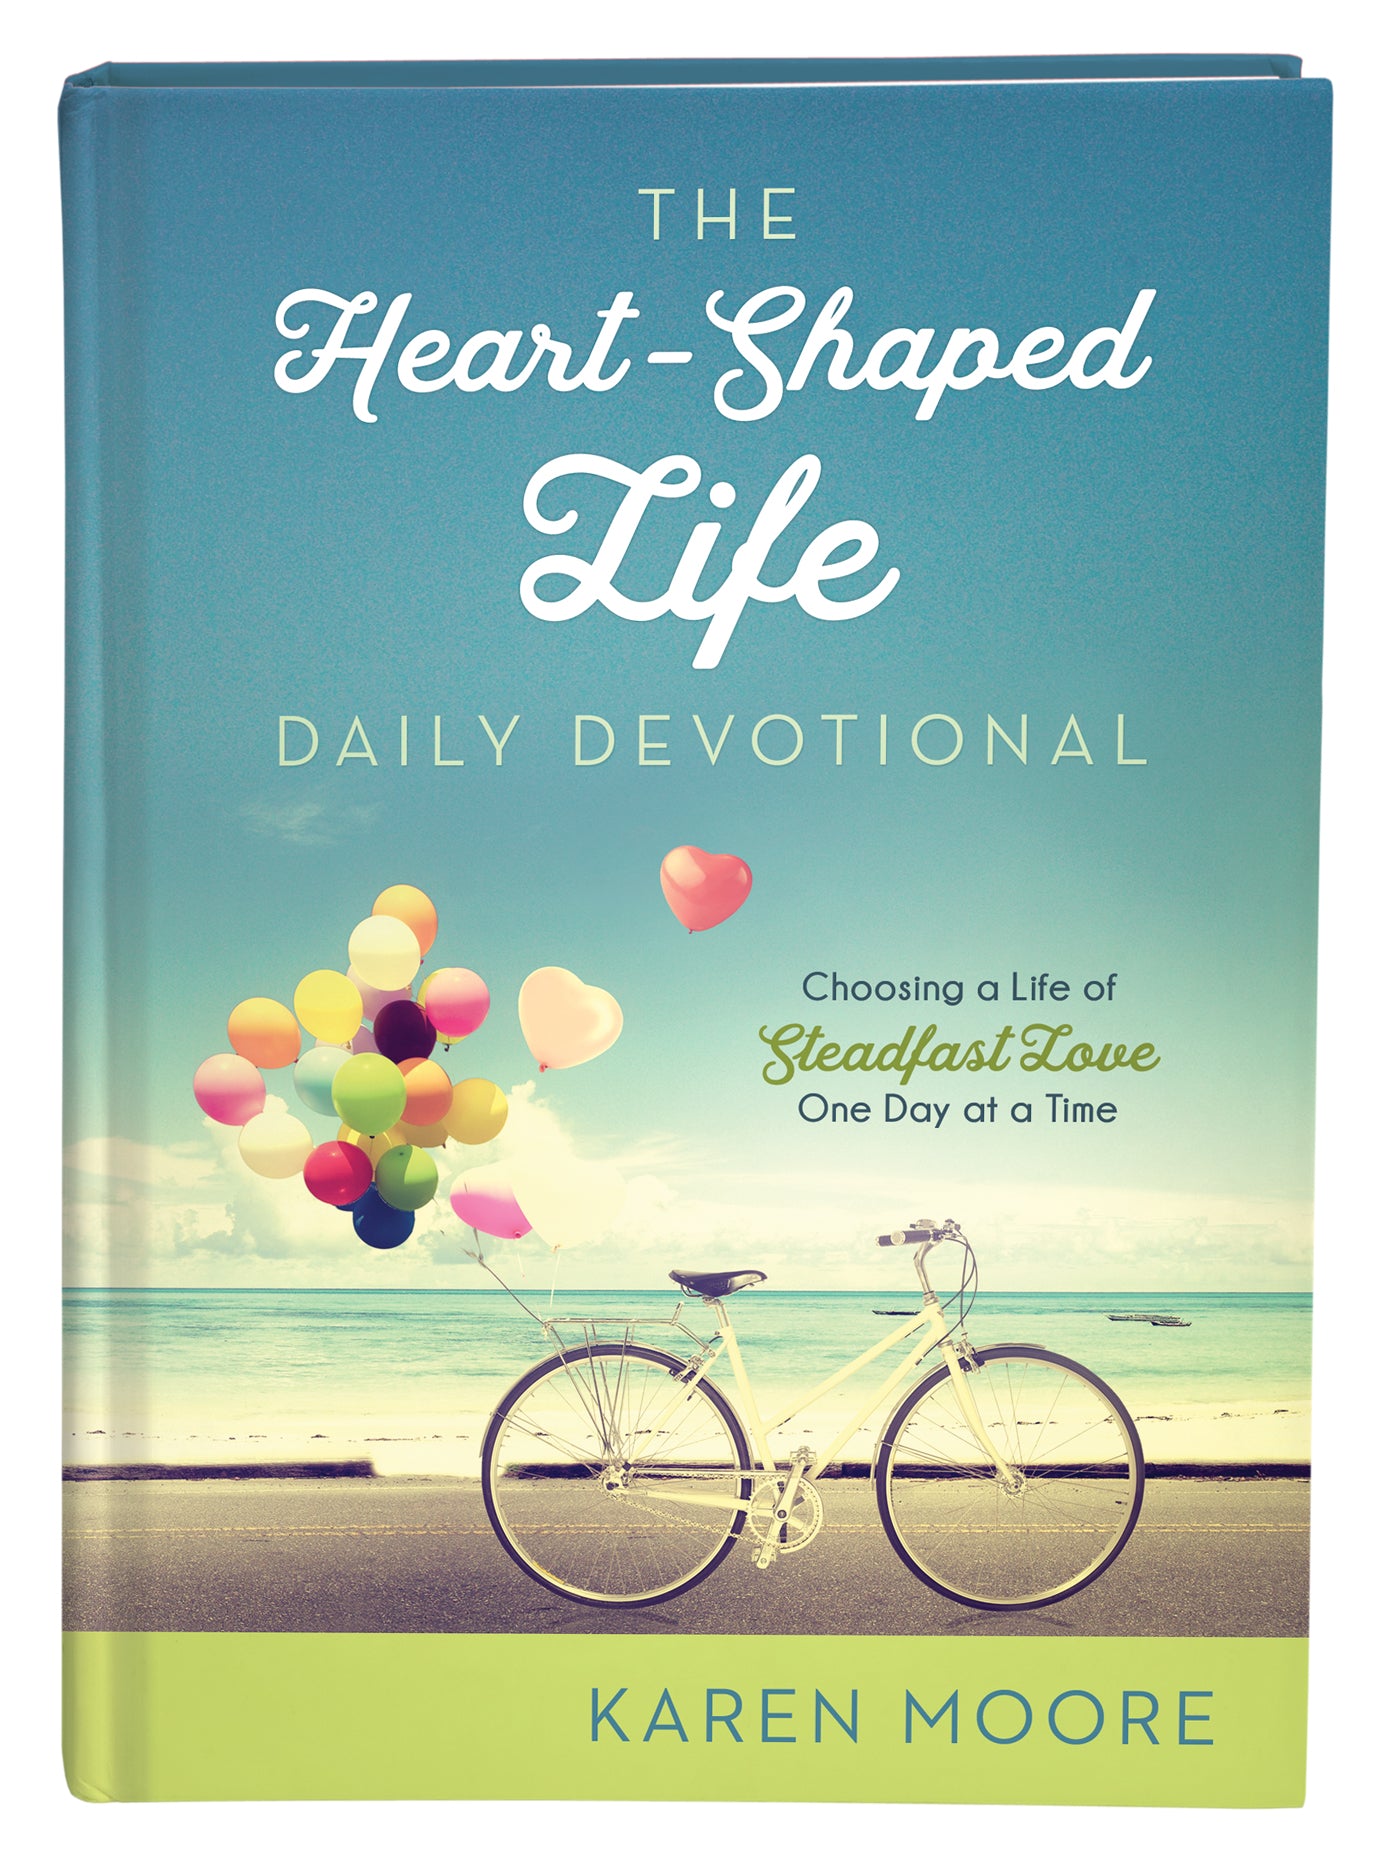 The Heart-Shaped Life Daily Devotional - The Christian Gift Company